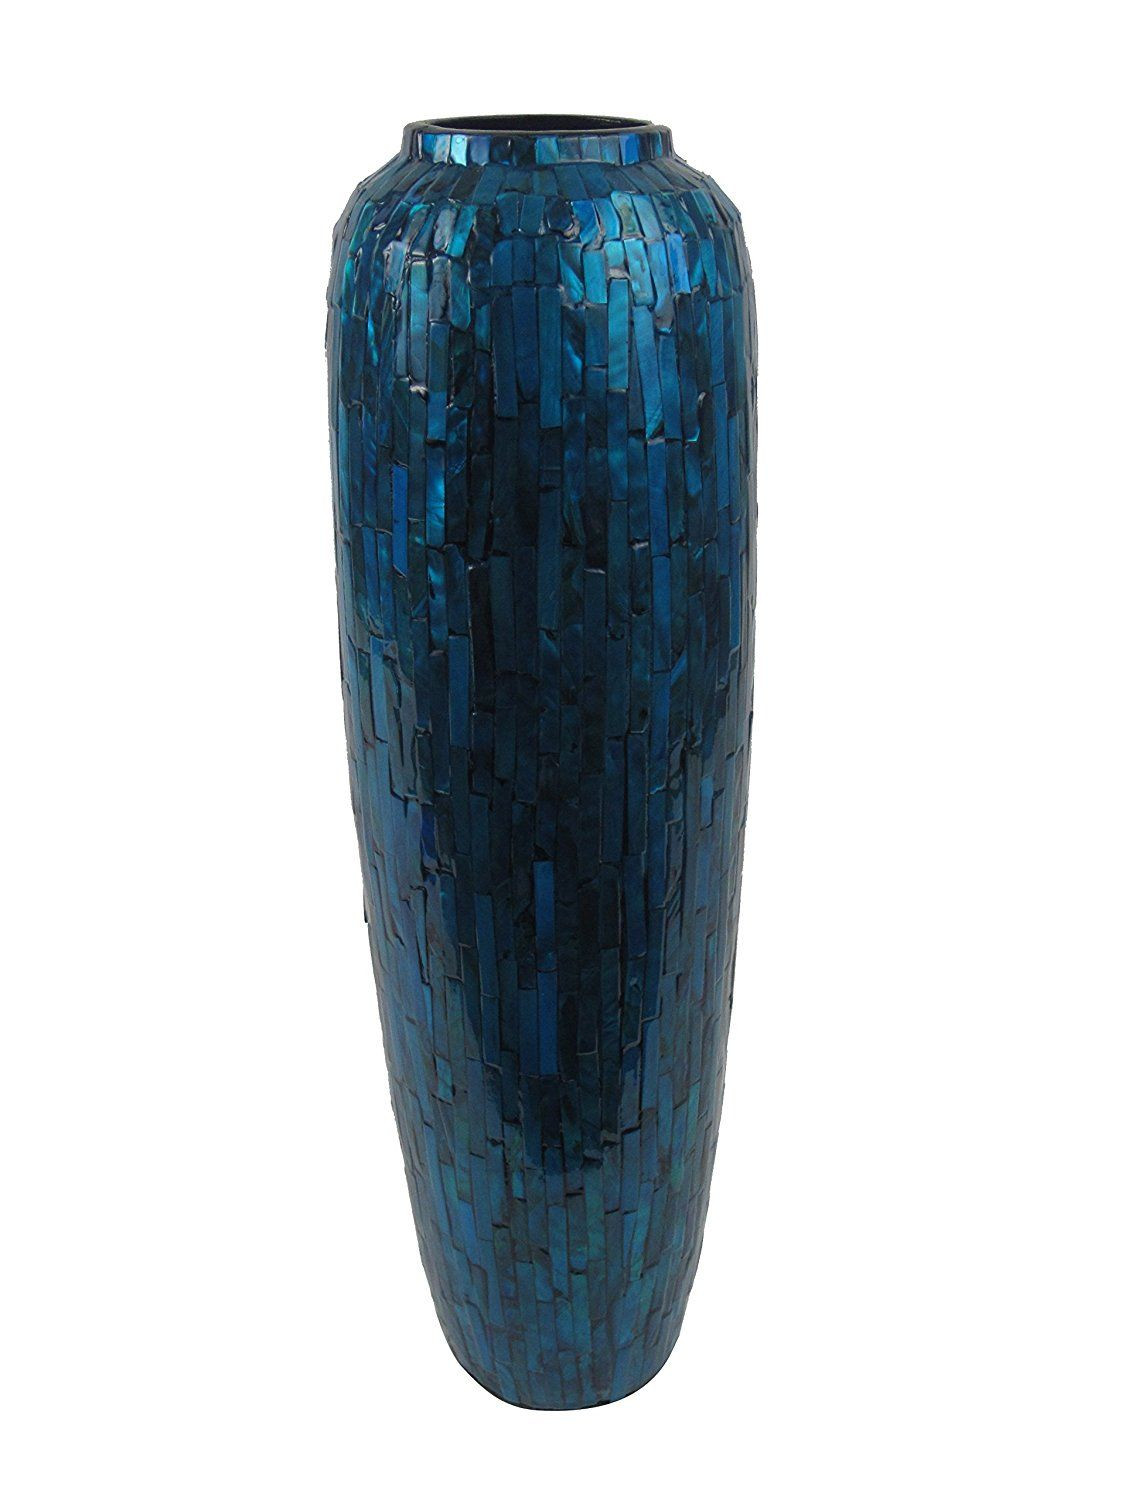 30 Unique Silver Textured Vase 2024 free download silver textured vase of firefly home collection mother of pearl ceramic vase 4 75 x 16 5 within ceramic vase